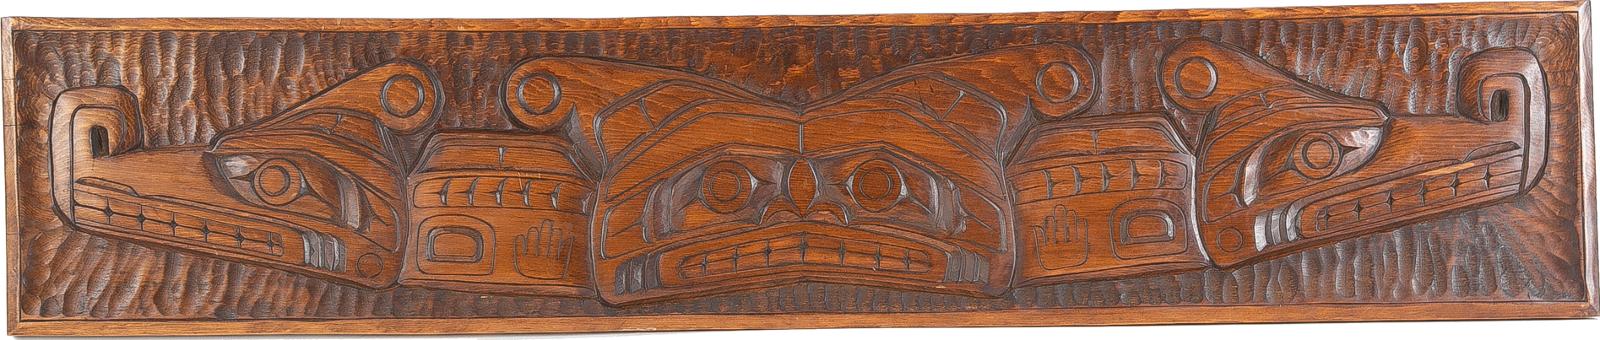 Dennis Matilpi (1951-2008) - Sisiutl Carved Wall Plaque